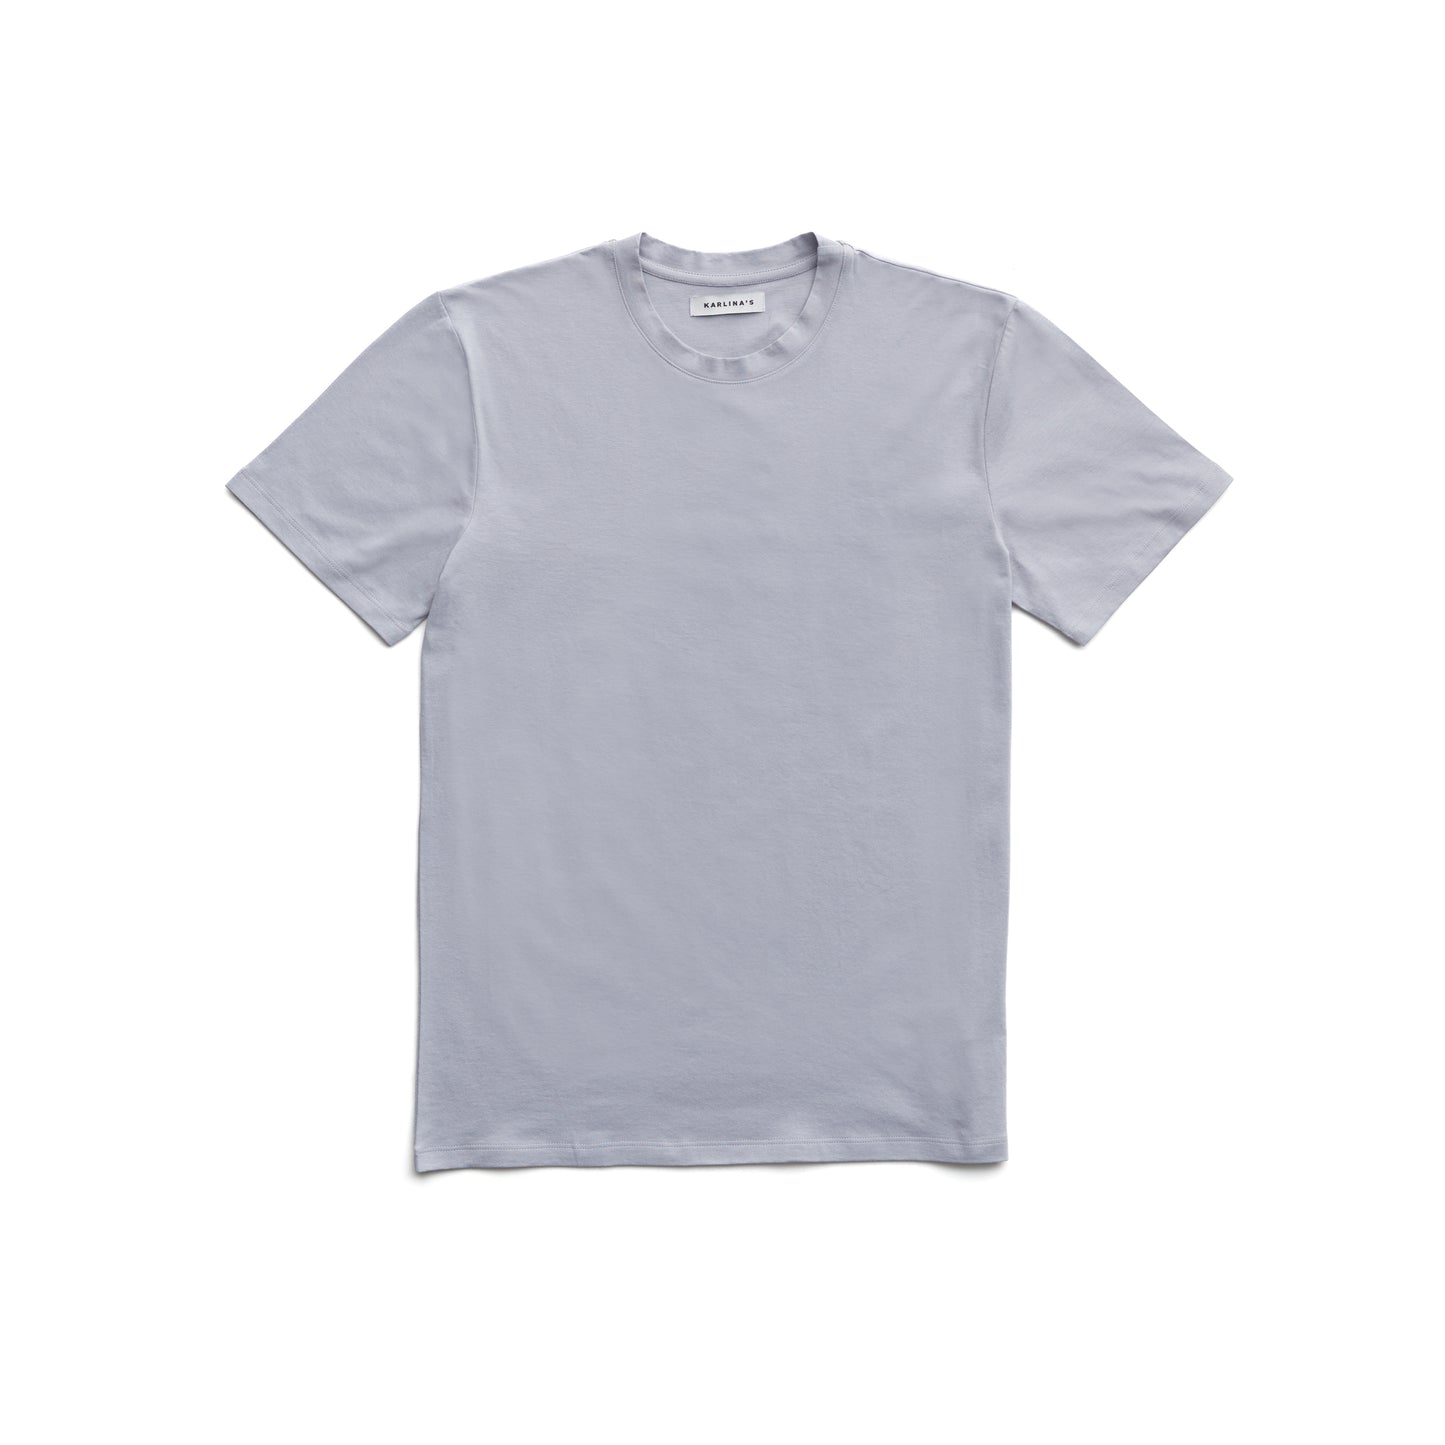 Ludde T-shirt in Grey